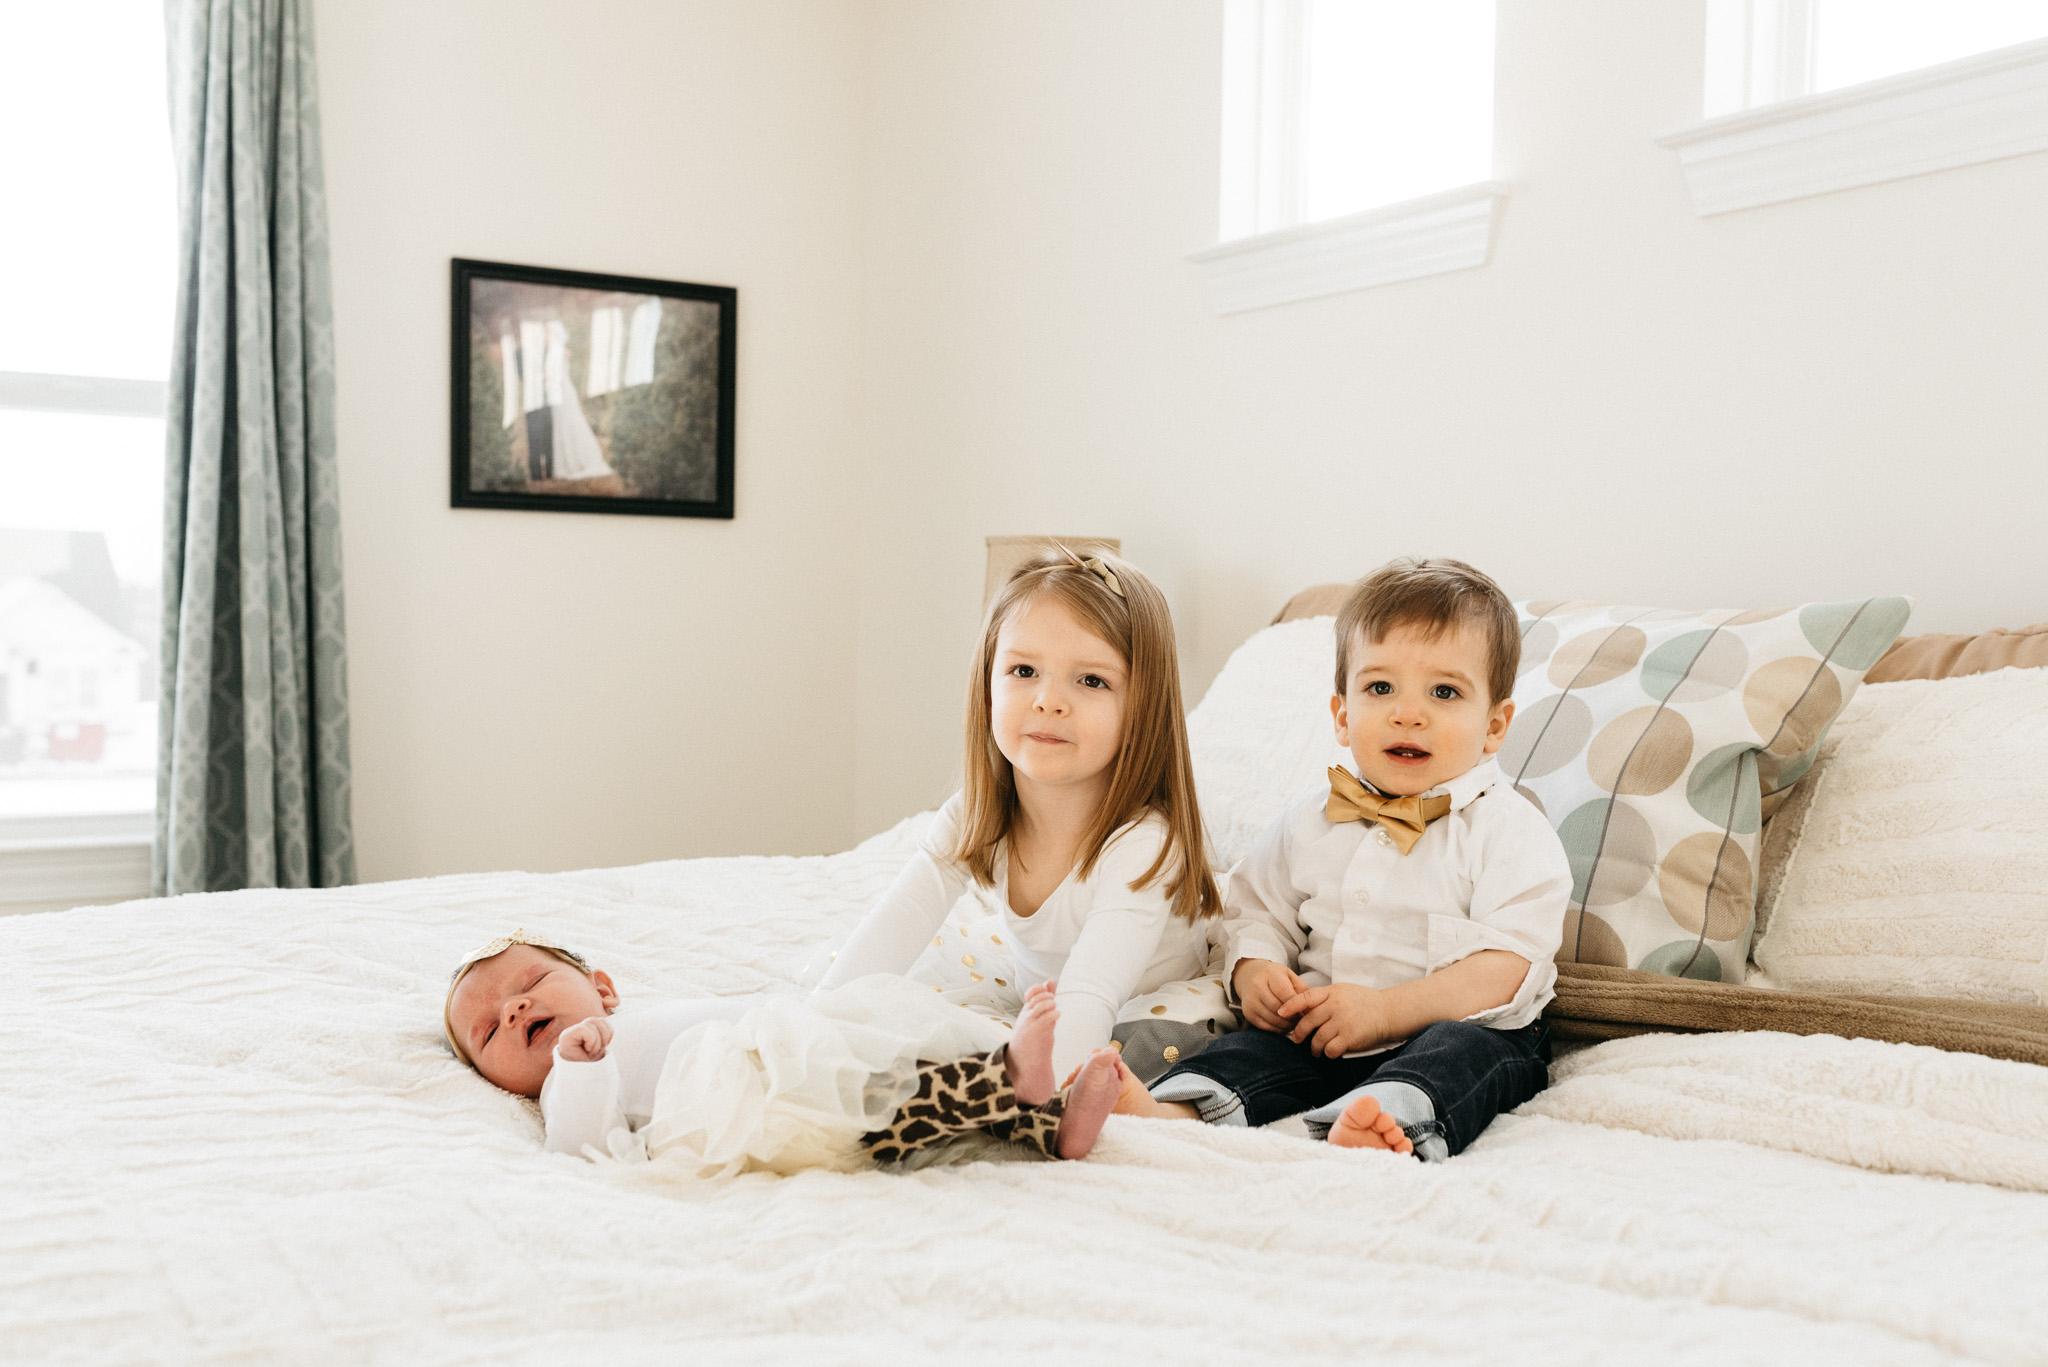 siblings-with-new-baby-sister-Columbus-Ohio-Photographer-Erika-Venci-Photography